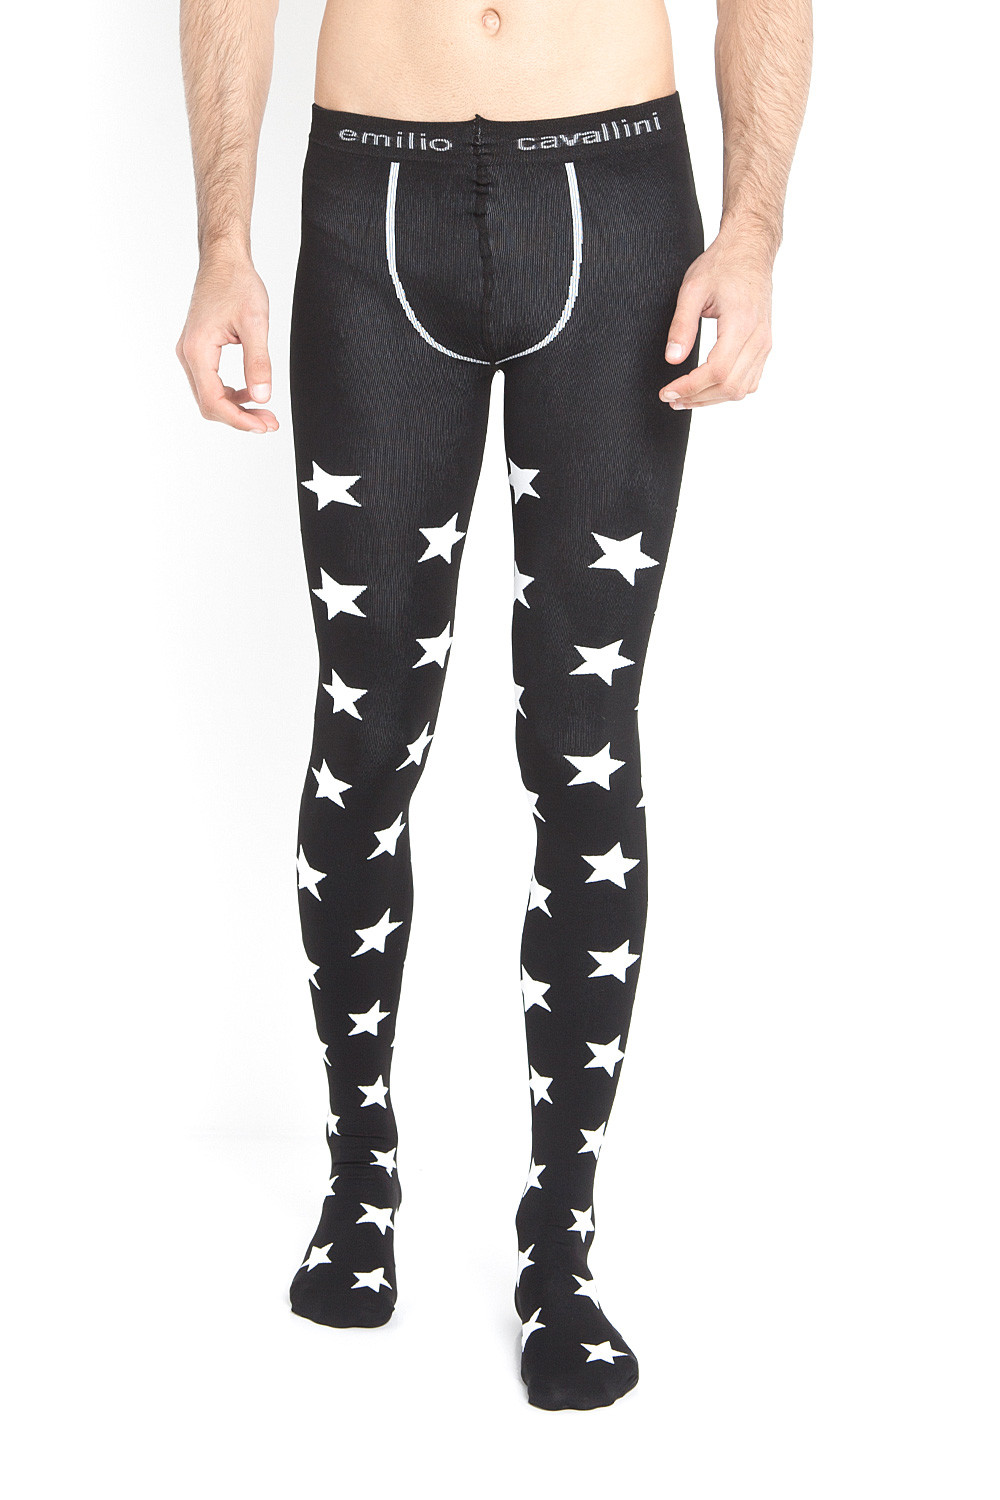 Stars Mantyhose, Mantyhose: Tights for Men